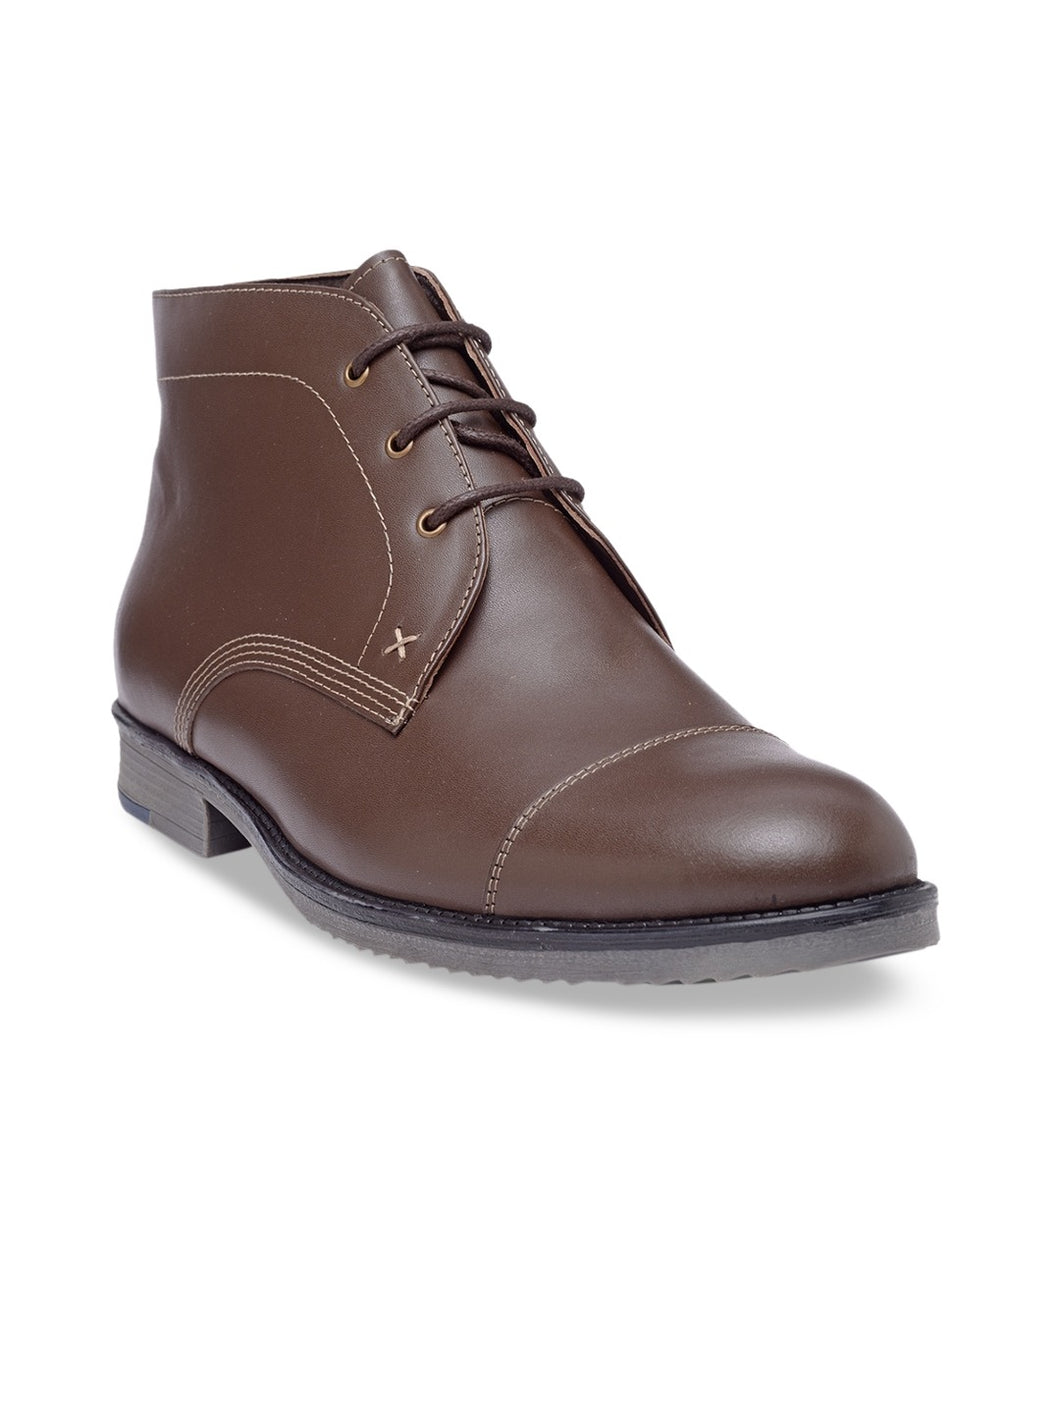 Men Brown Solid Genuine Leather Mid-Top Flat Boots